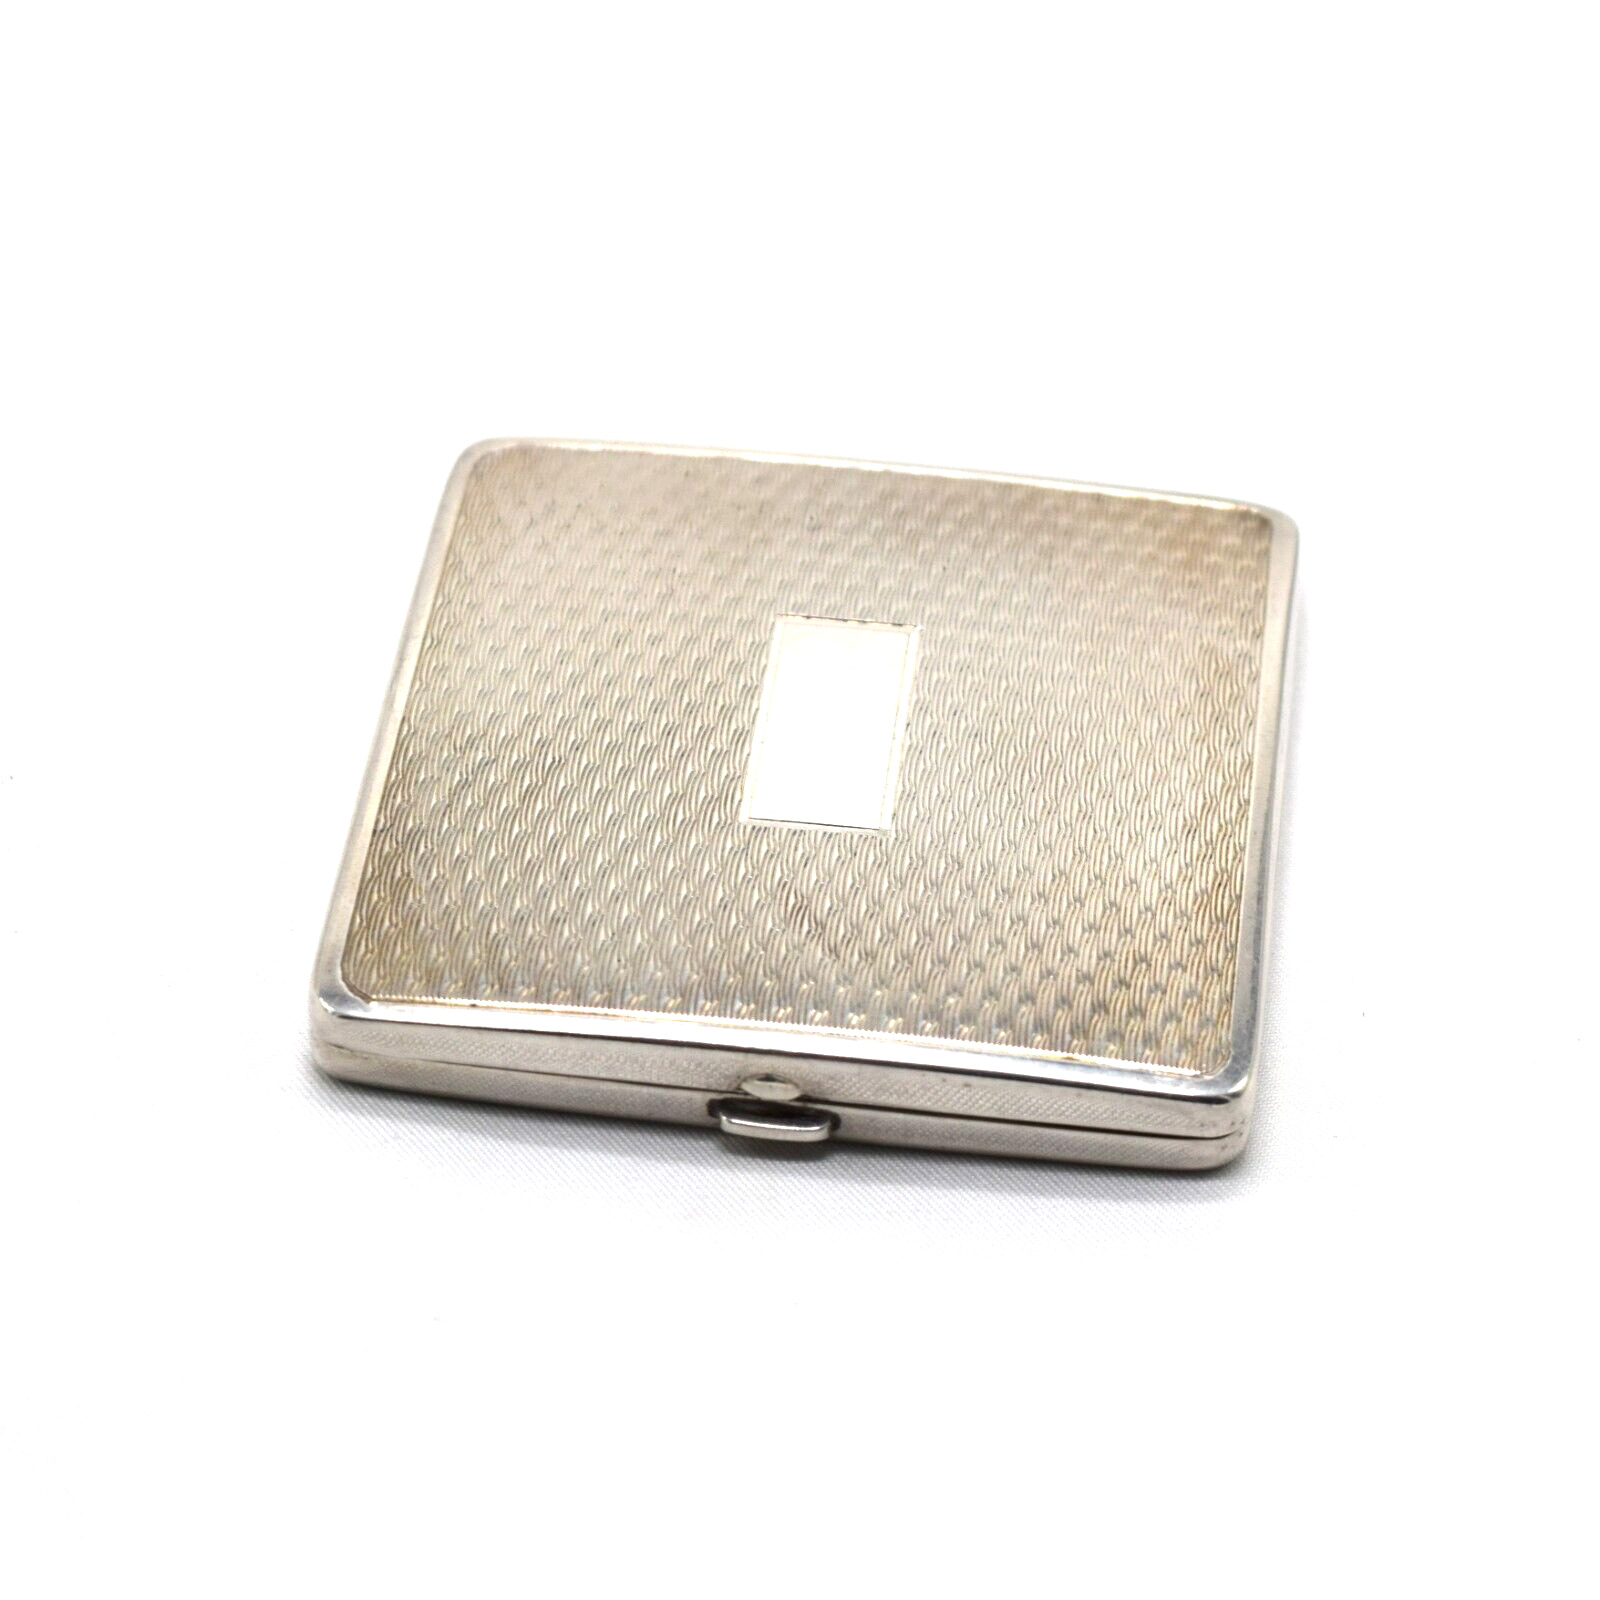 Exquisite Midcentury Watson & Briggs Sterling Silver Square Loose Powder Compact